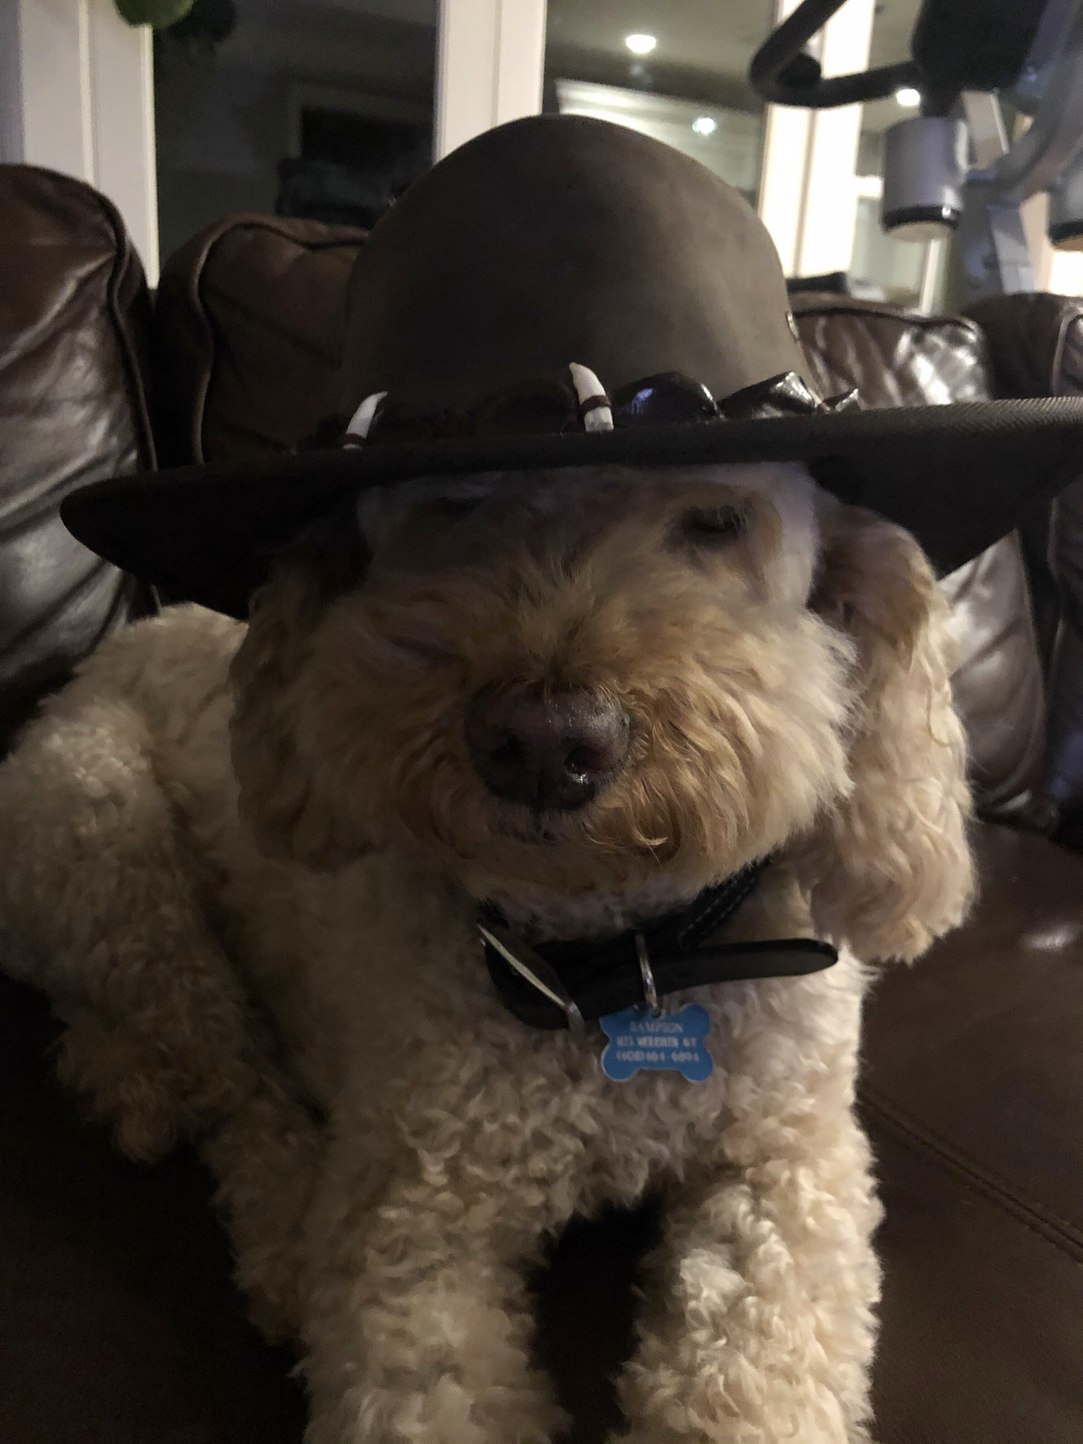 No Meme Just my dog in a hat he look grumpy because he is old.